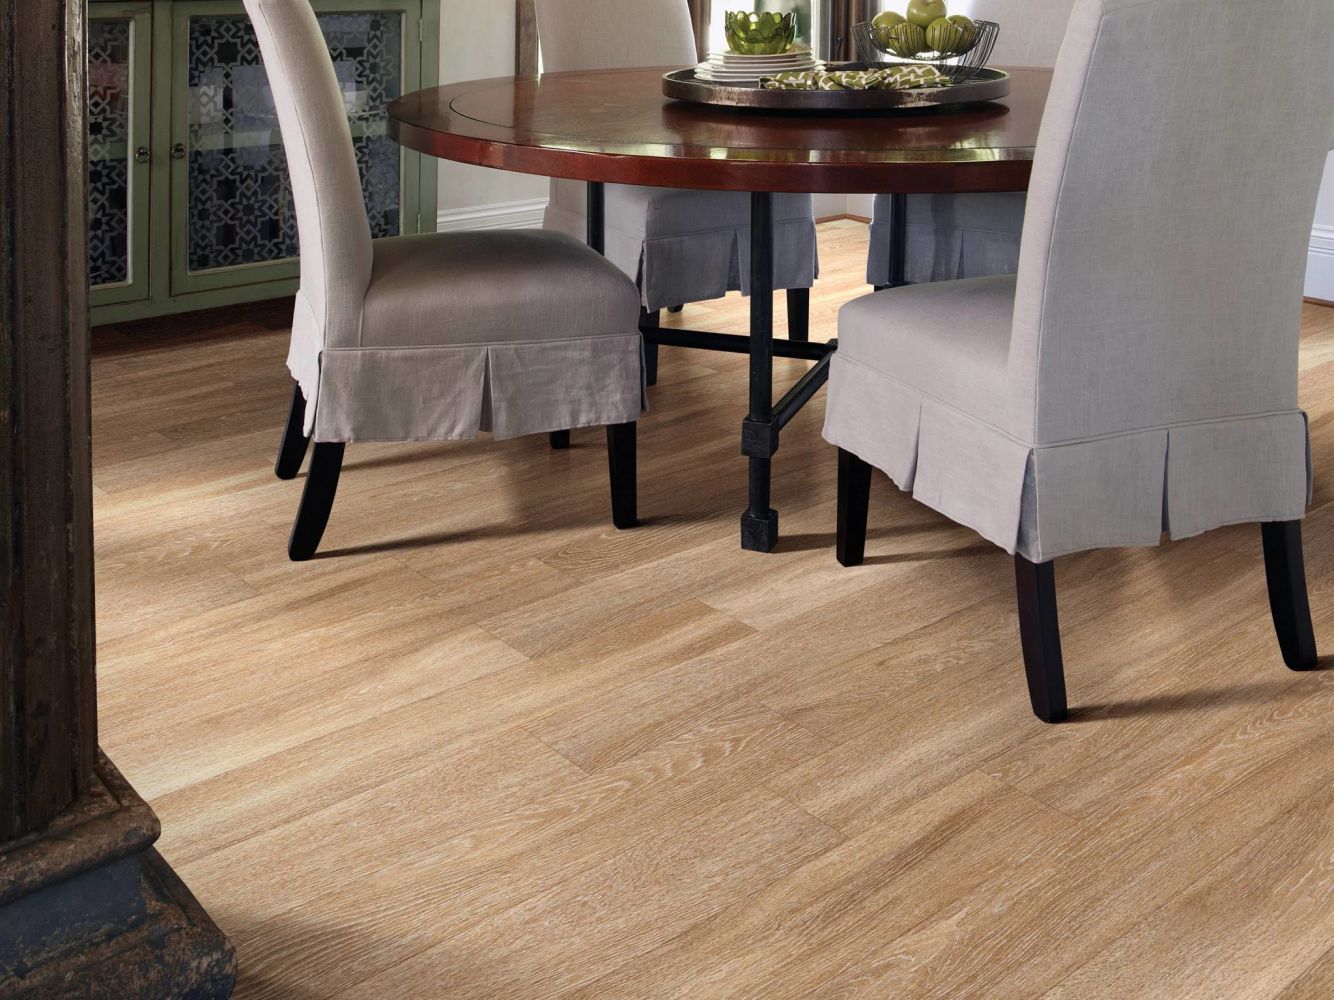 Shaw Floors Resilient Property Solutions Rane 600 Plank Brussels 00235_VE151